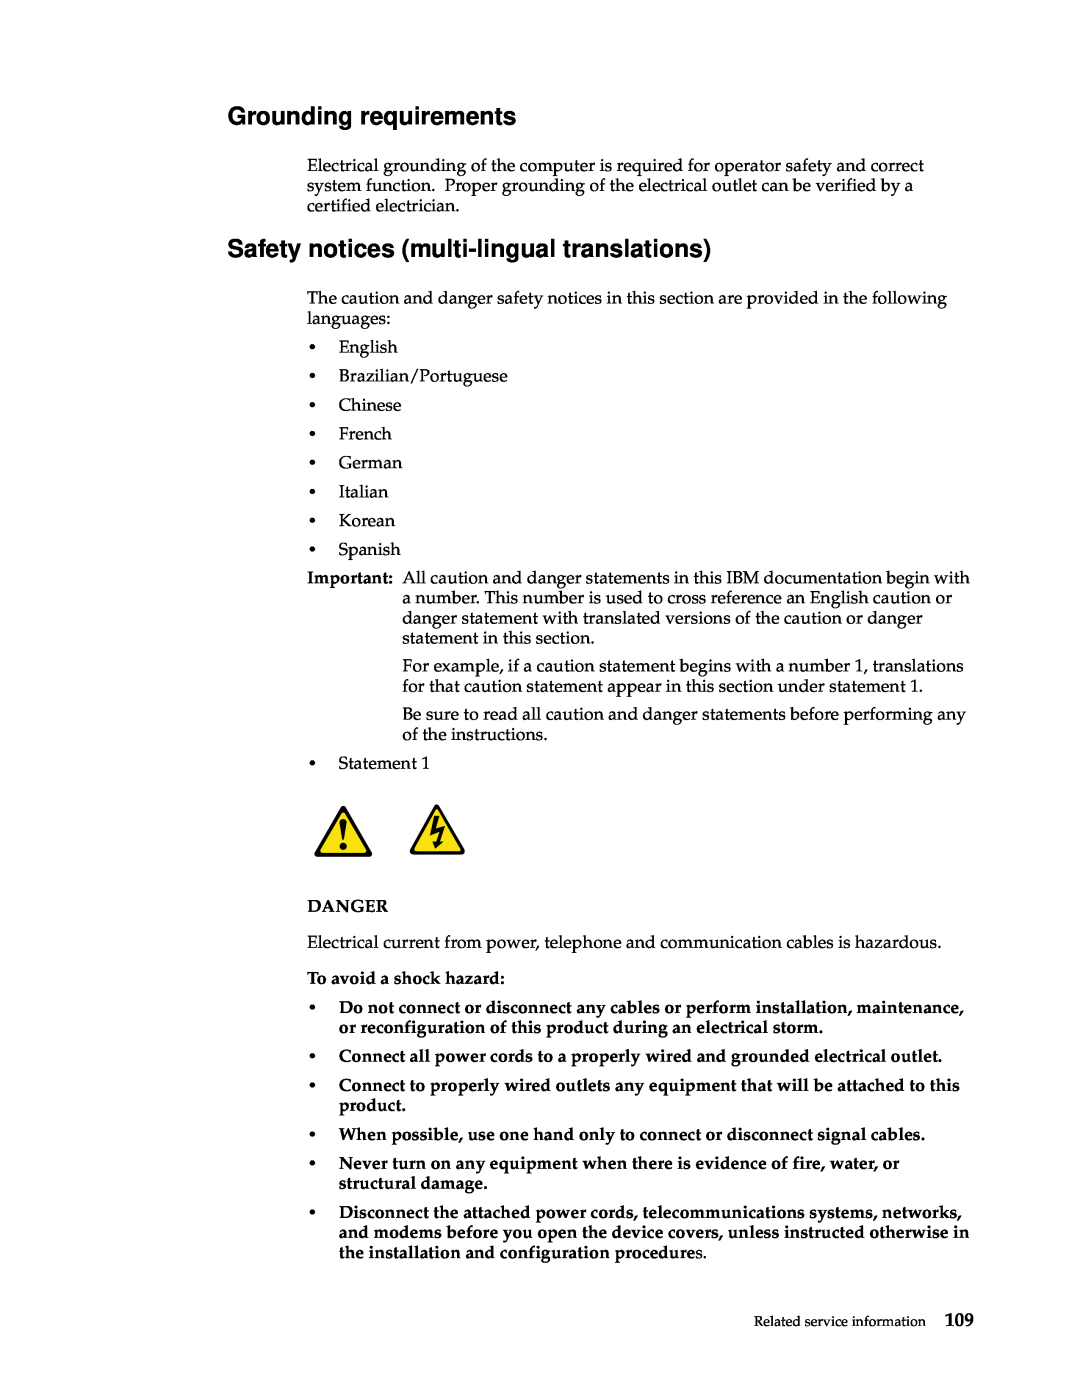 IBM x Series 200 manual Grounding requirements, Safety notices multi-lingual translations 